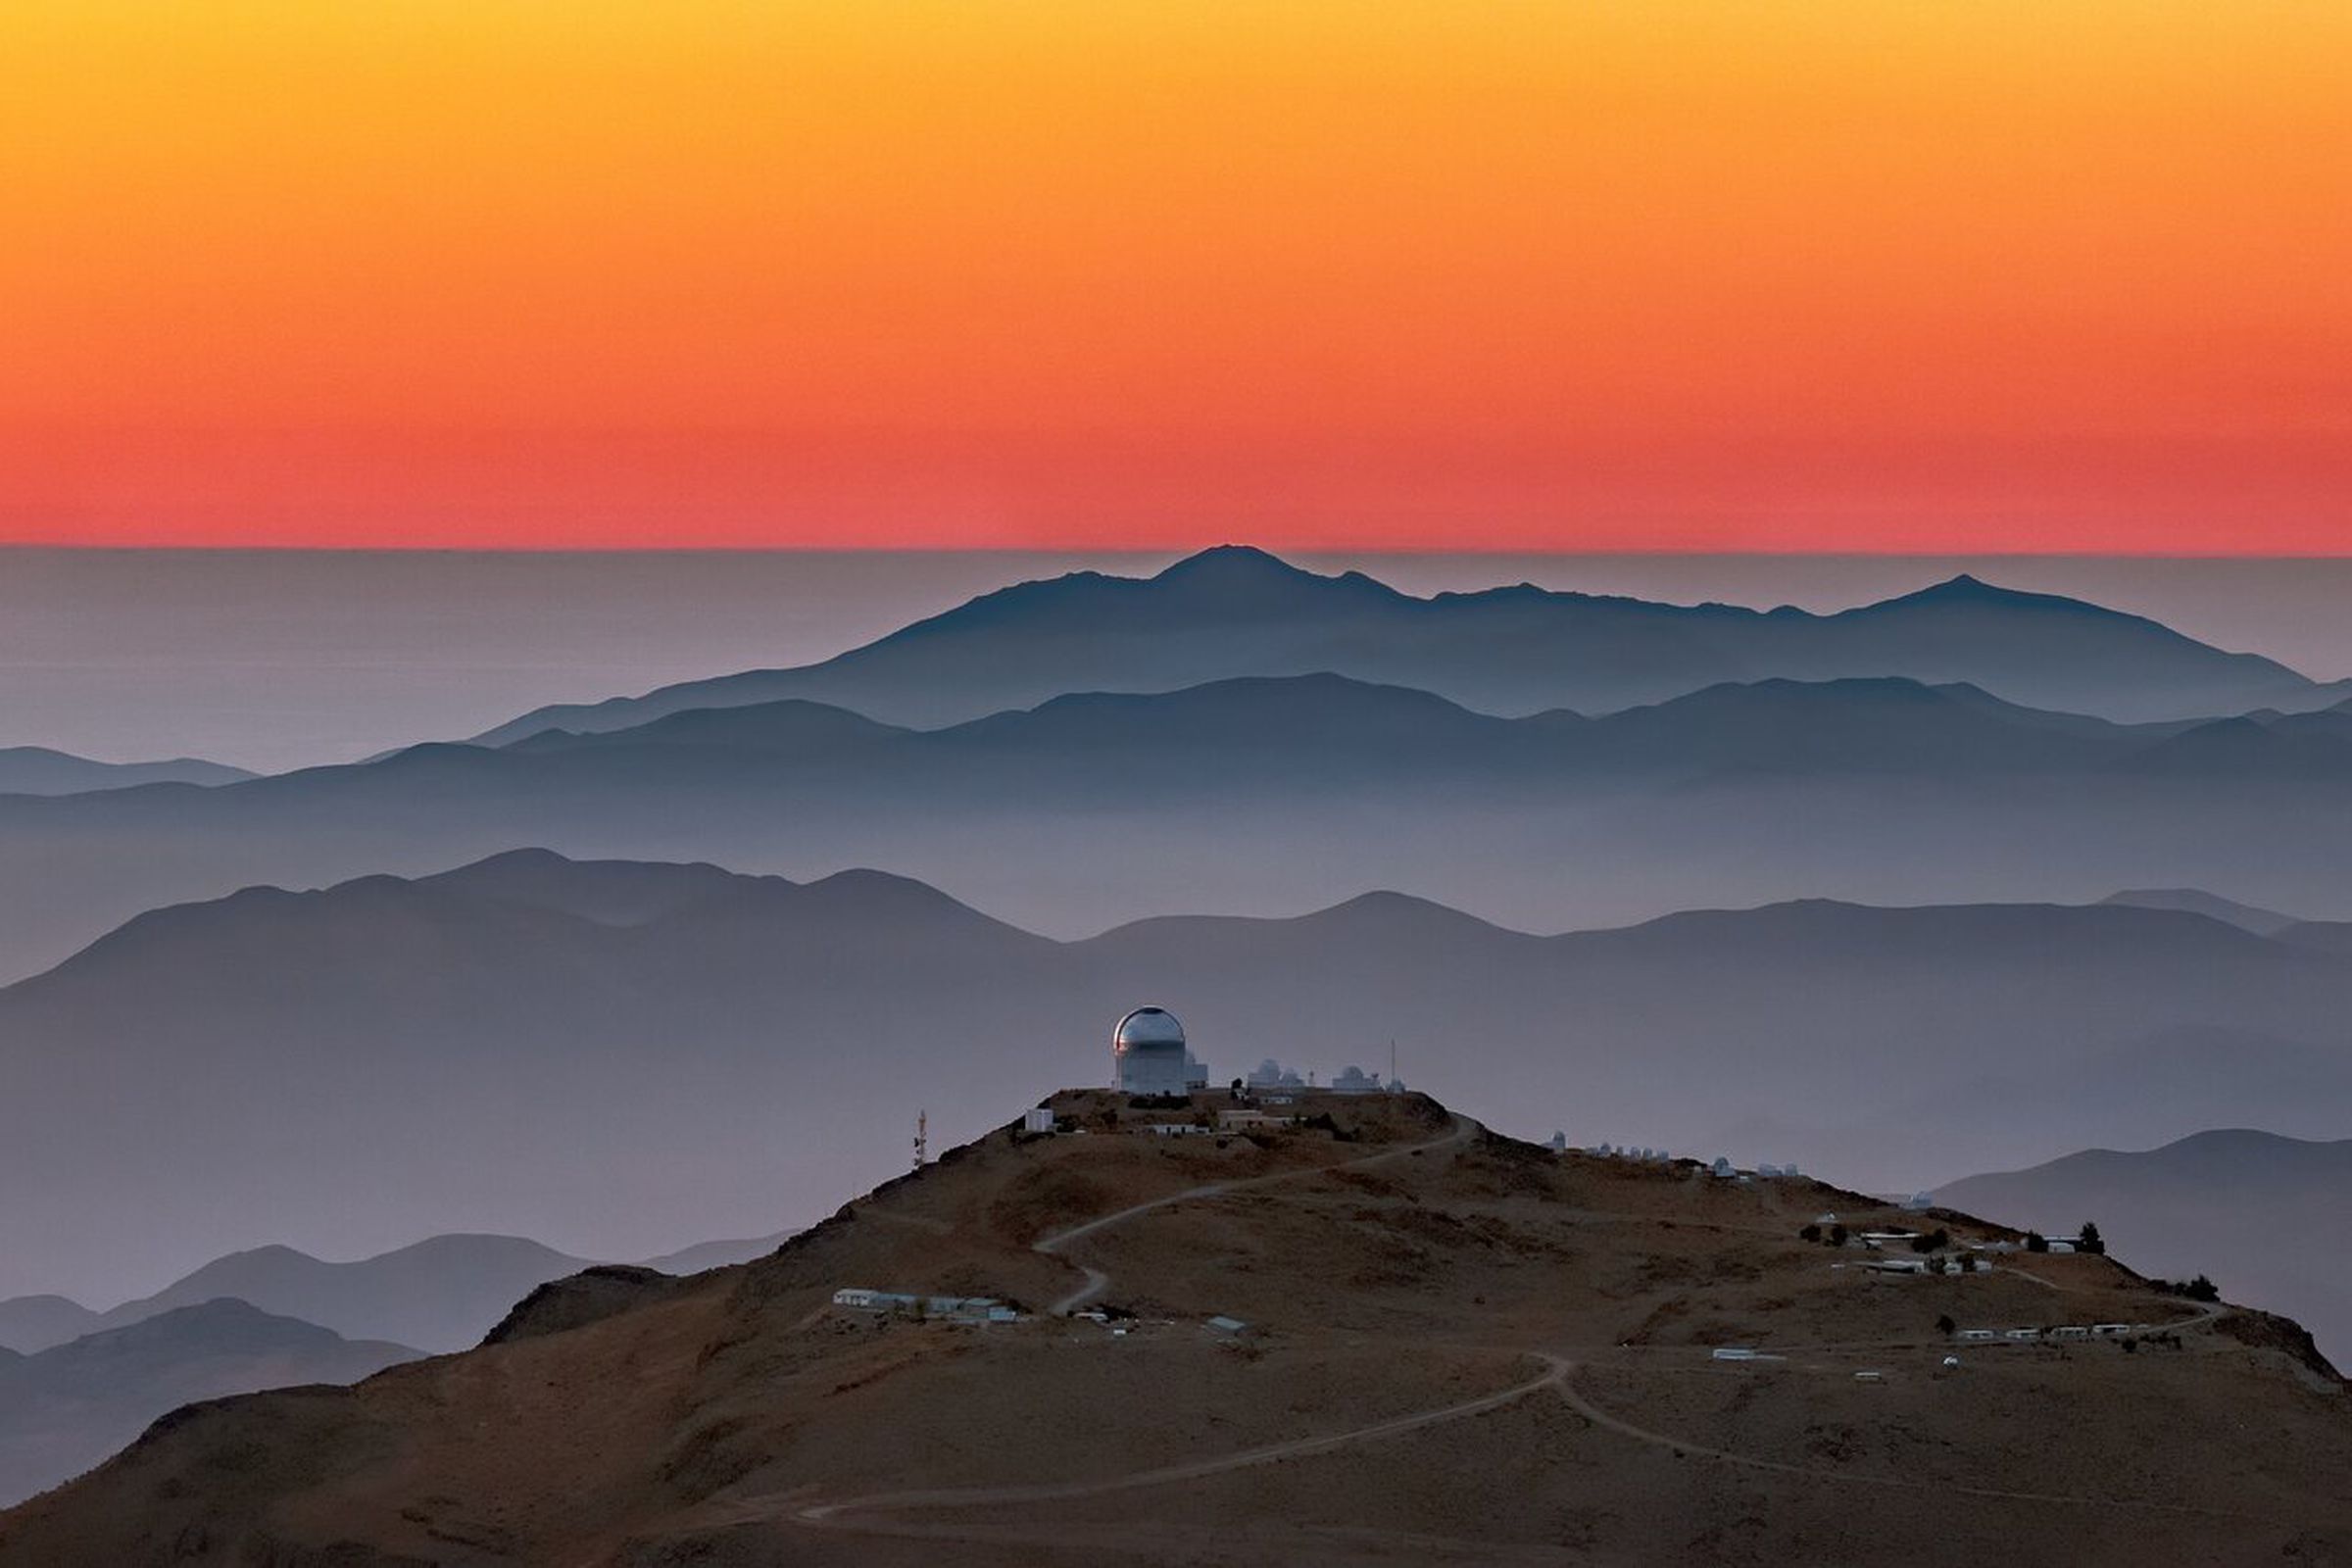 The Víctor M. Blanco 4-m Telescope and other telescopes on a mountain peak in Chile at sunset